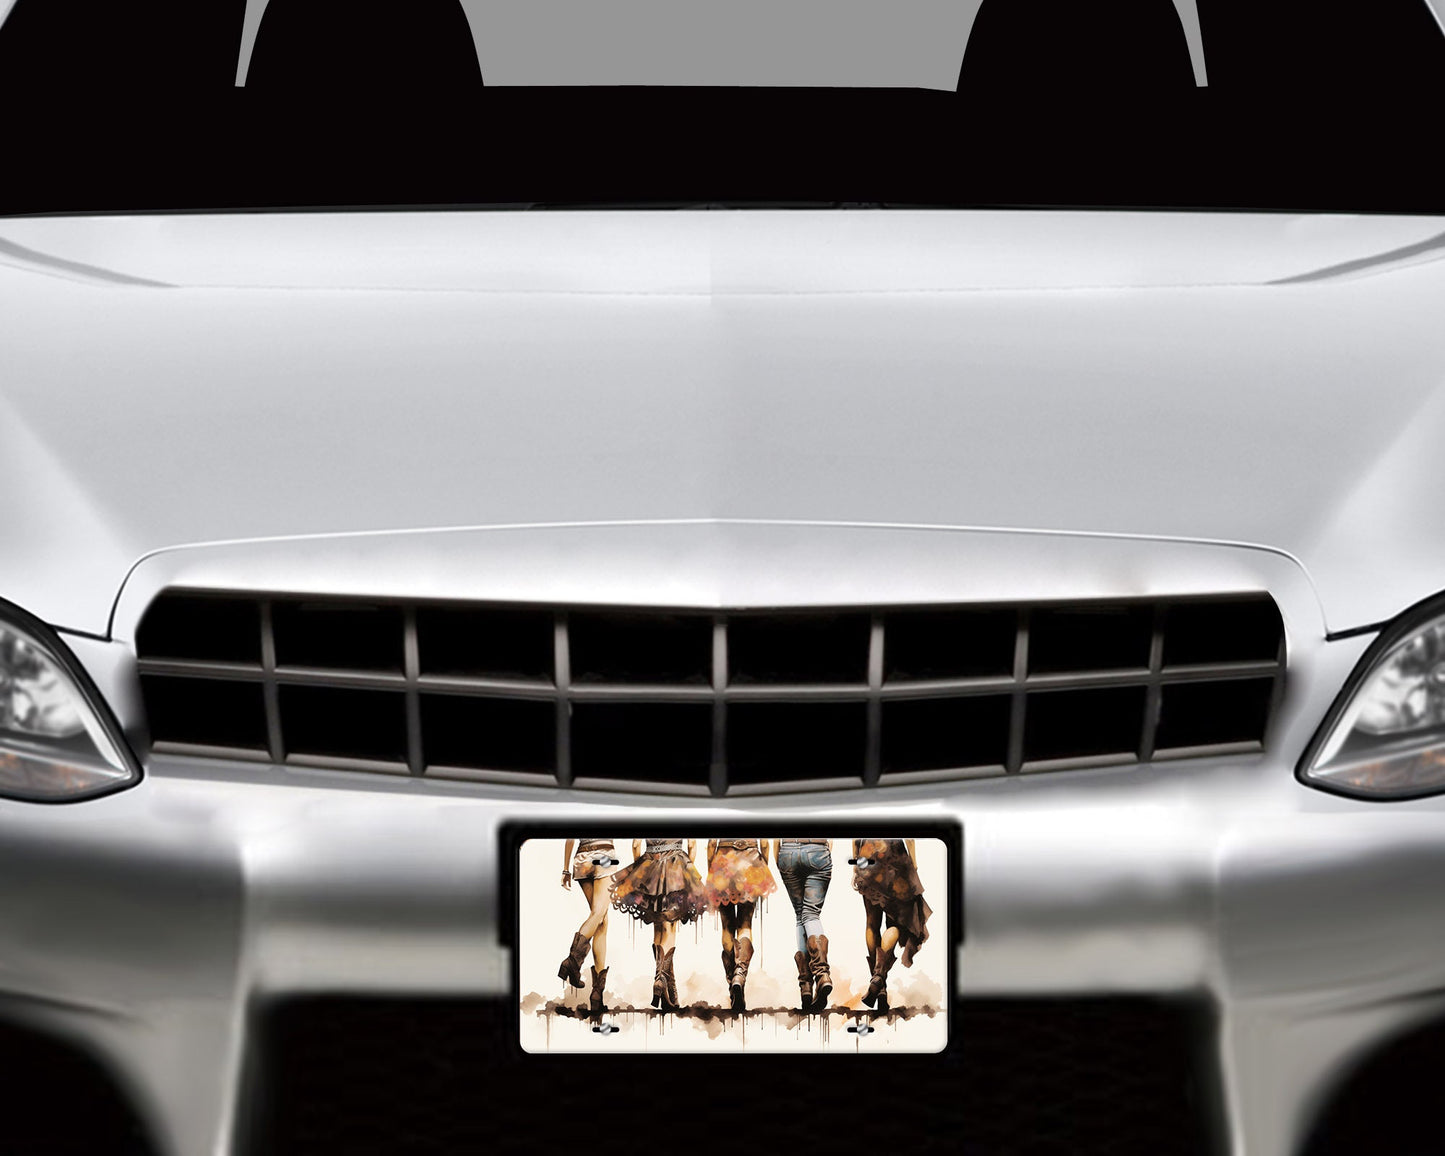 New Release License Plate, Cowgirls and Boots Printed Aluminum Front License Plate, Car Accessory, Vanity Plate, Cute Car Tag